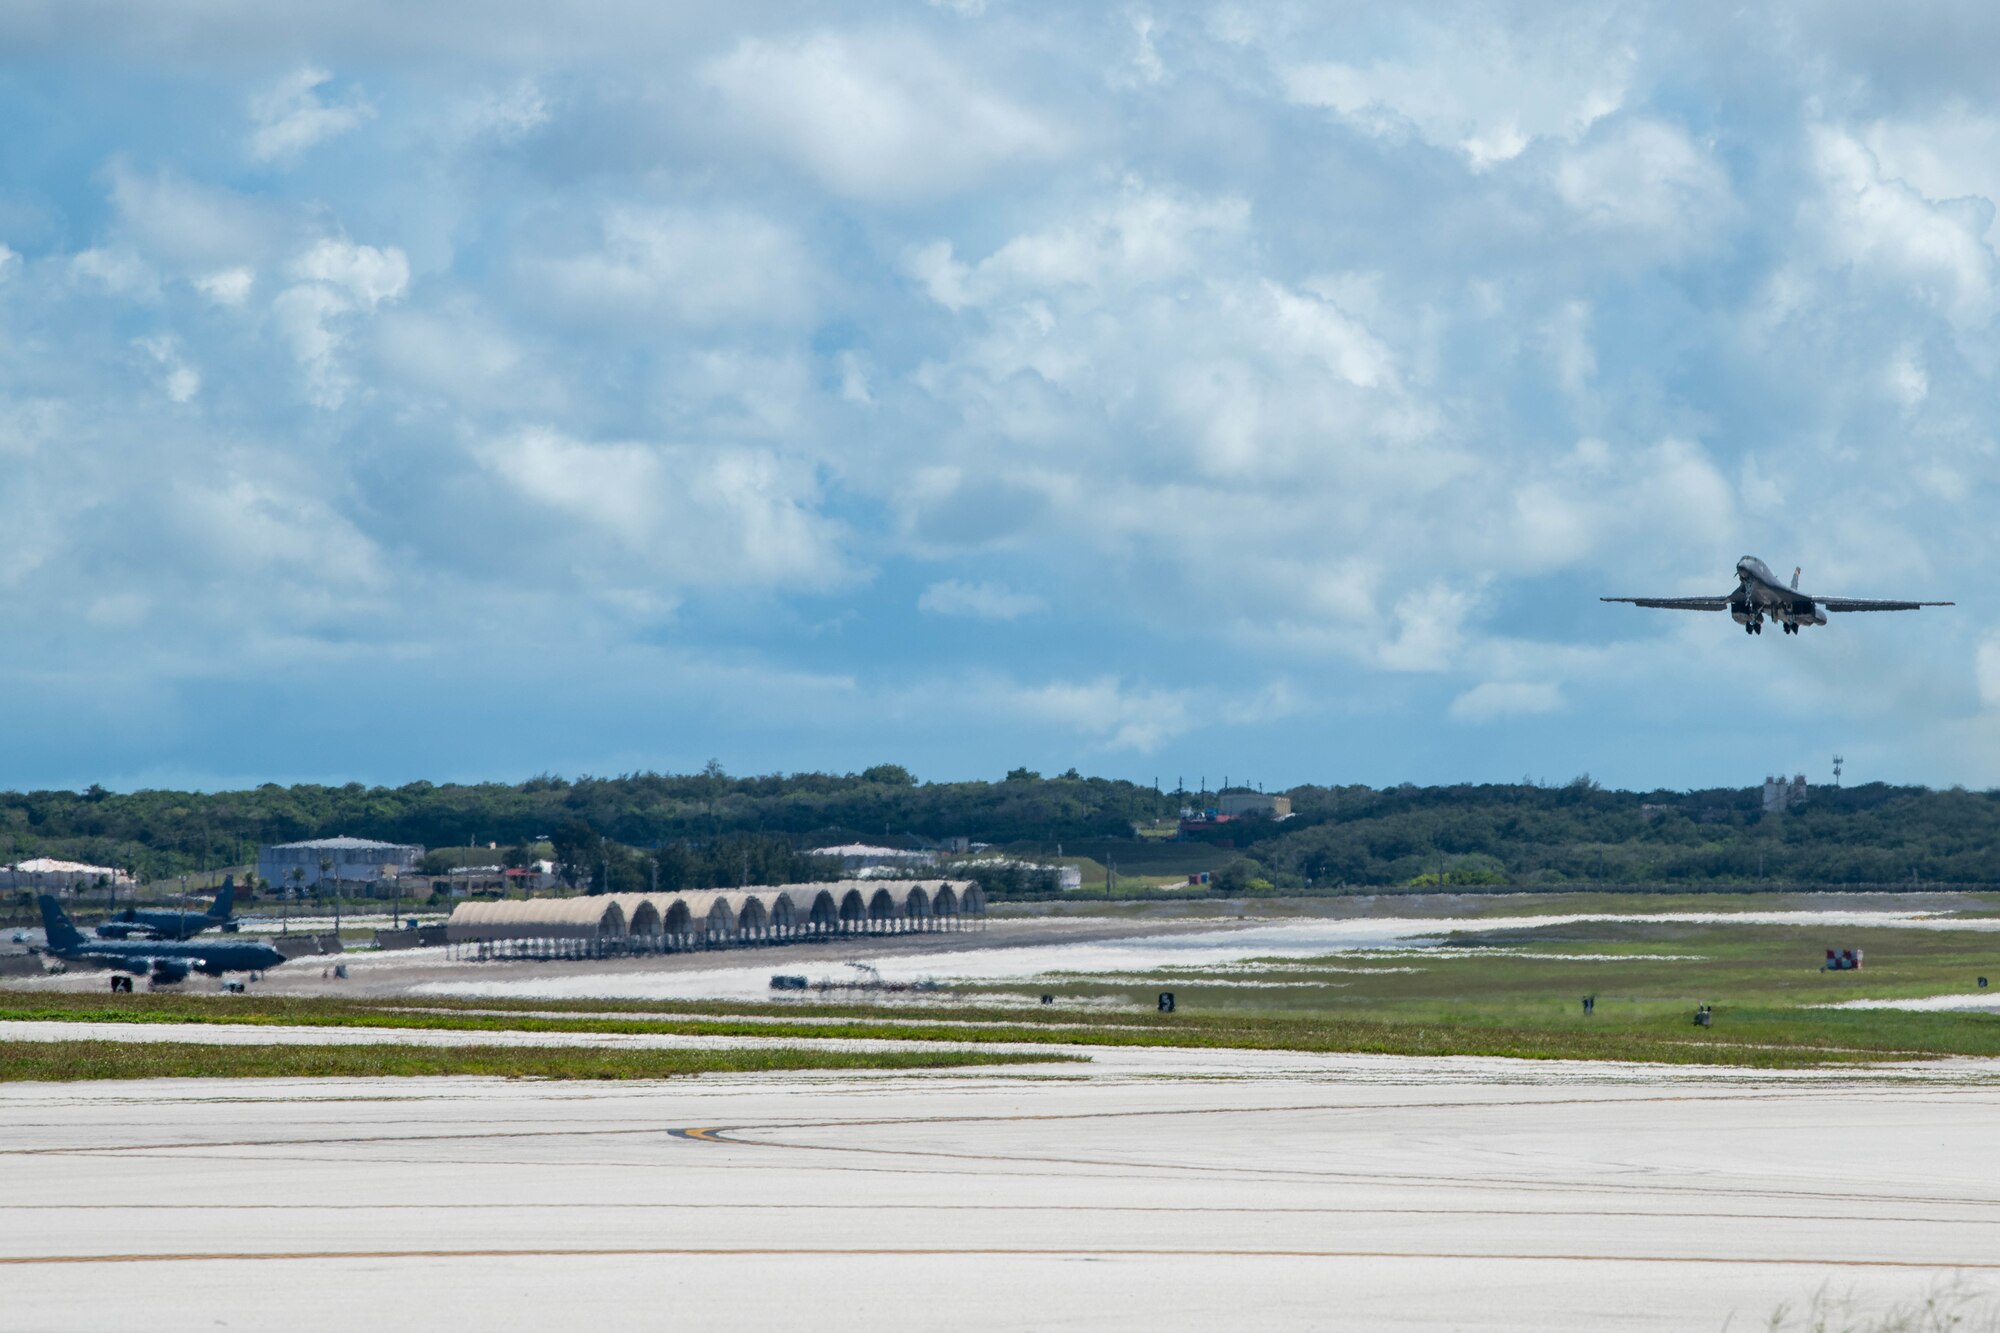 A U.S. Air Force B-1B Lancer, assigned to the 34th Bomb Squadron, Ellsworth Air Force Base, prepares to land at Andersen Air Force Base, Guam, for a Bomber Task Force mission June 2, 2022.